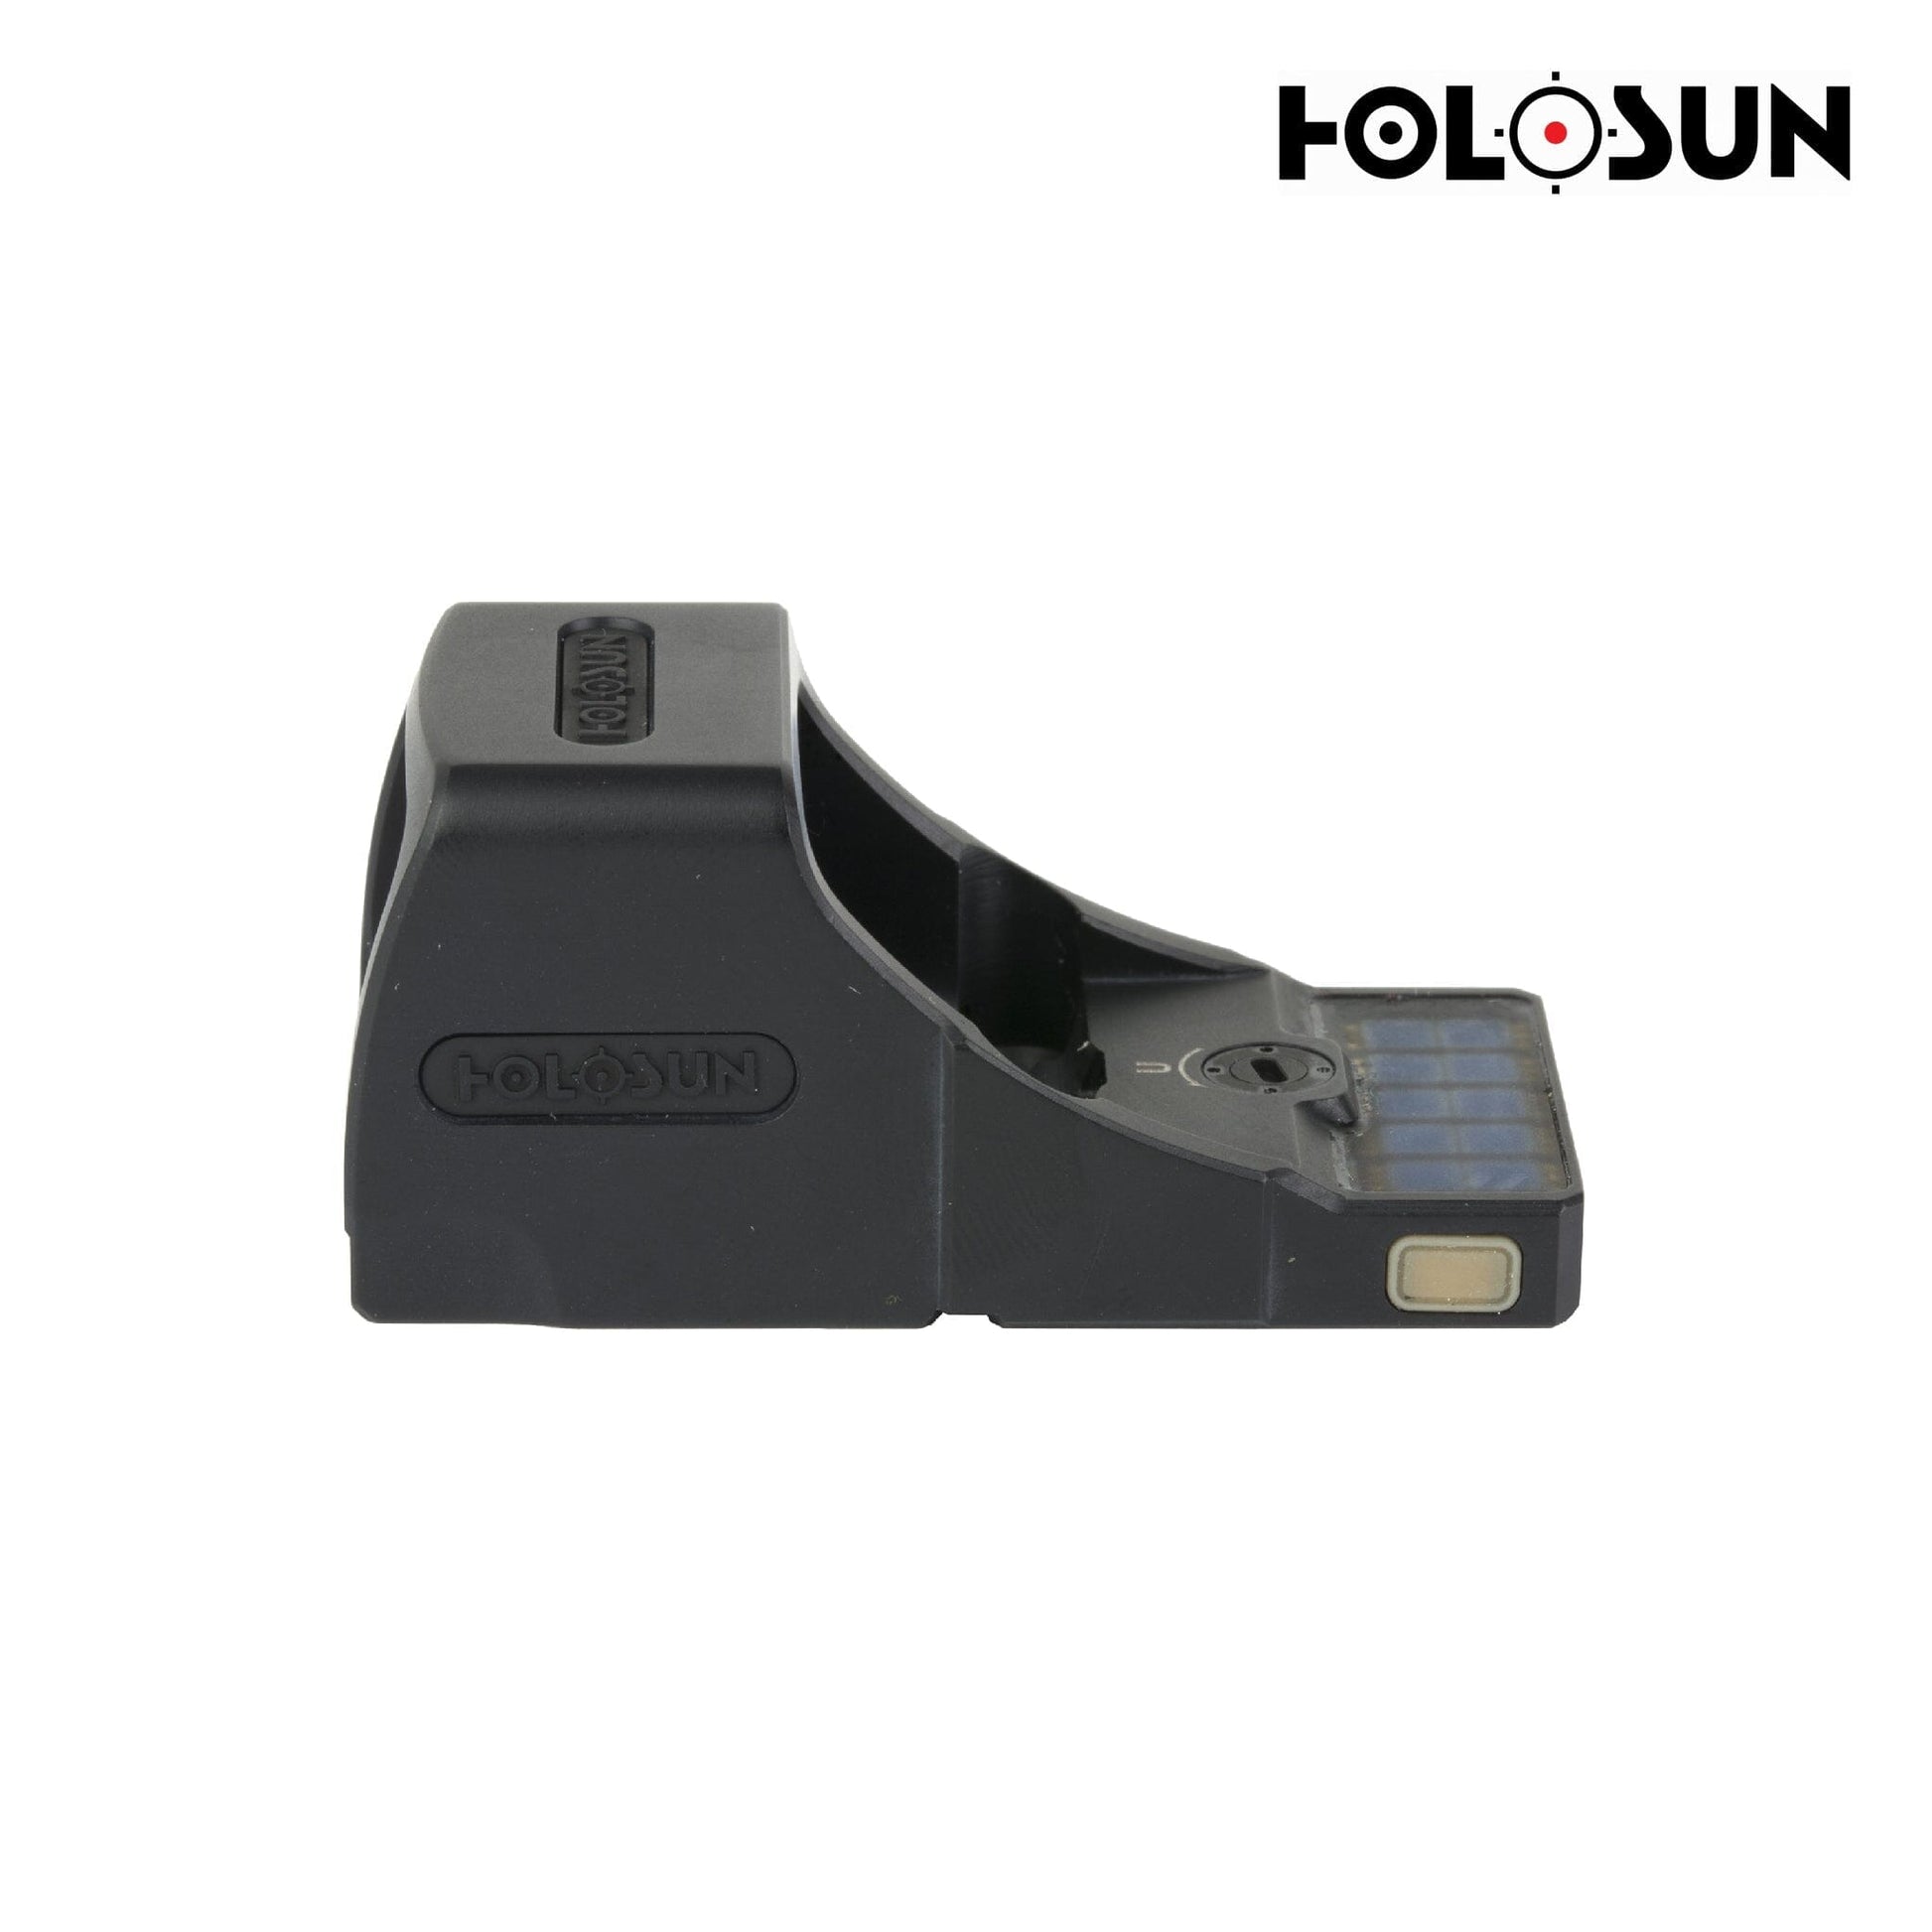 Holosun SCS Green Dot Sight for Smith & Wesson M&P - SCS-MP2-GR Green Dot Sight Holosun Technologies 